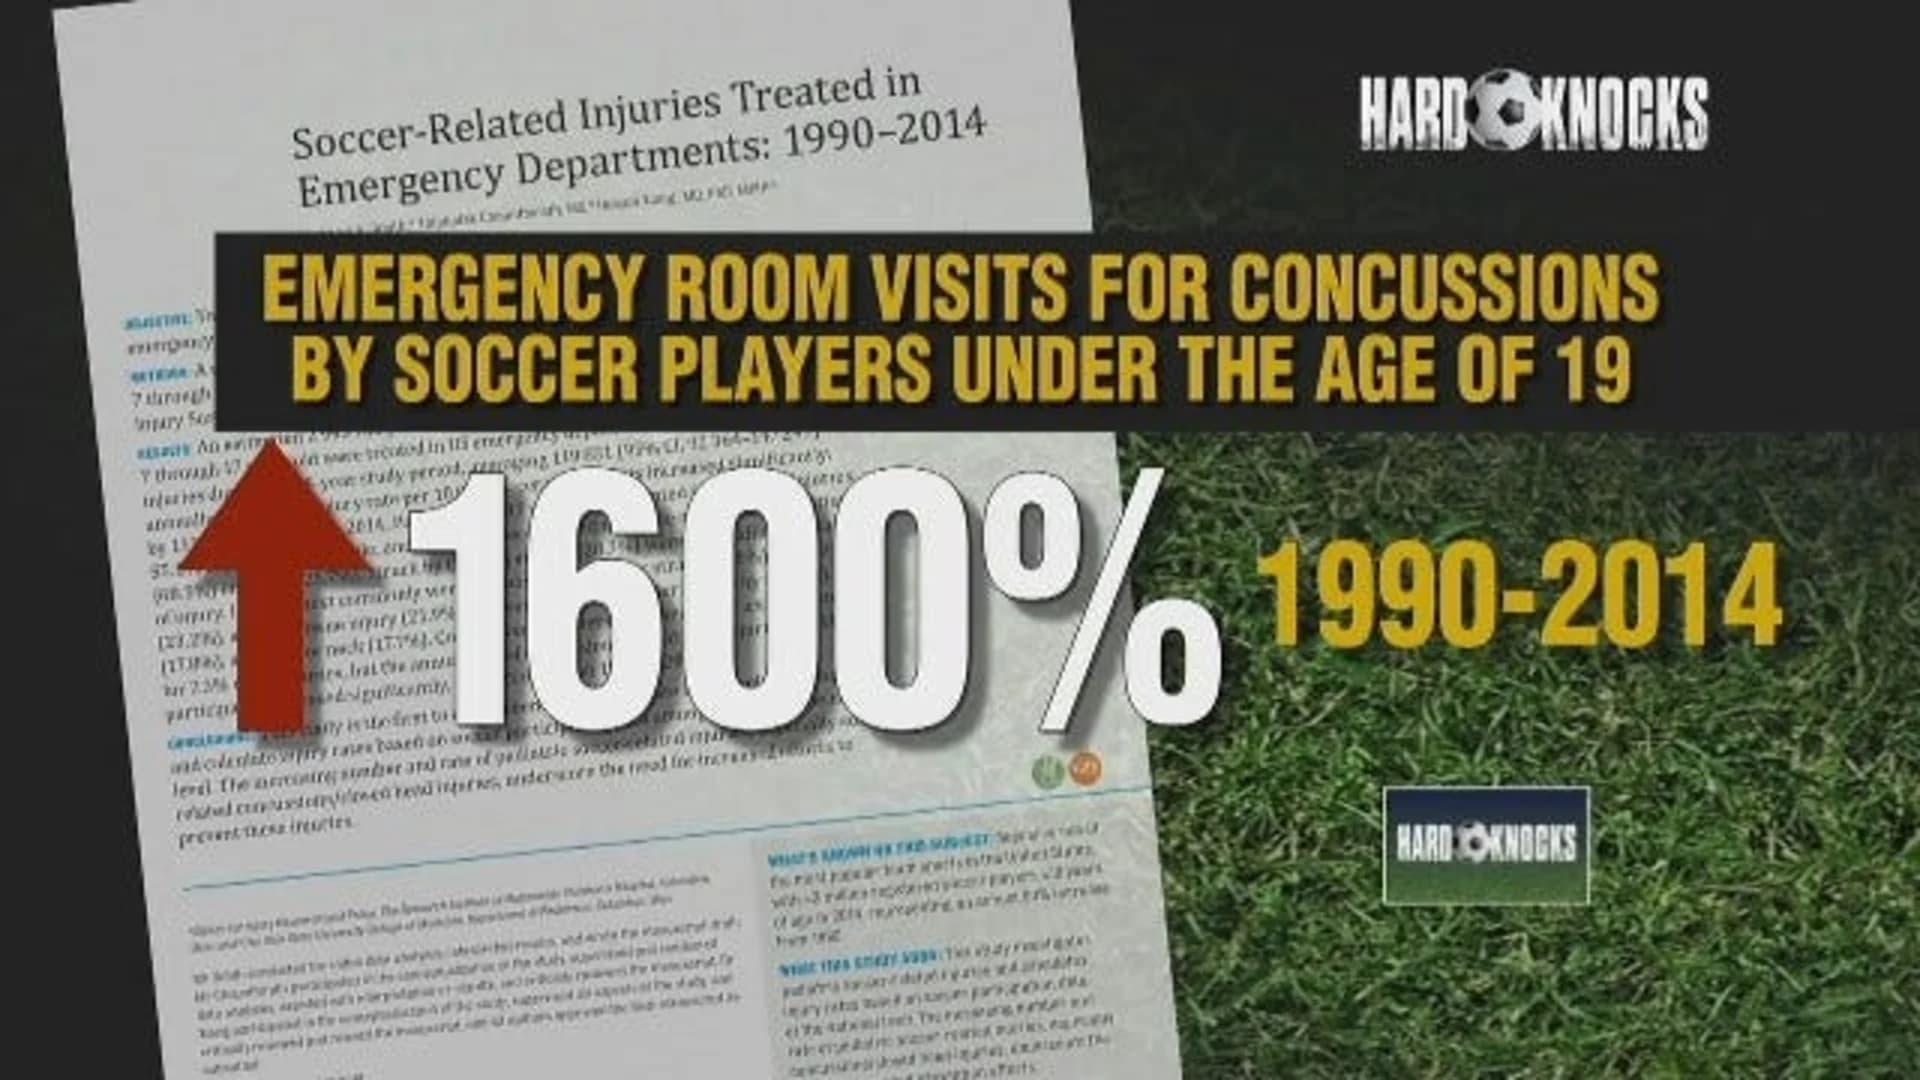 Hard Knocks: Rate of concussions spiking for girls high school soccer players